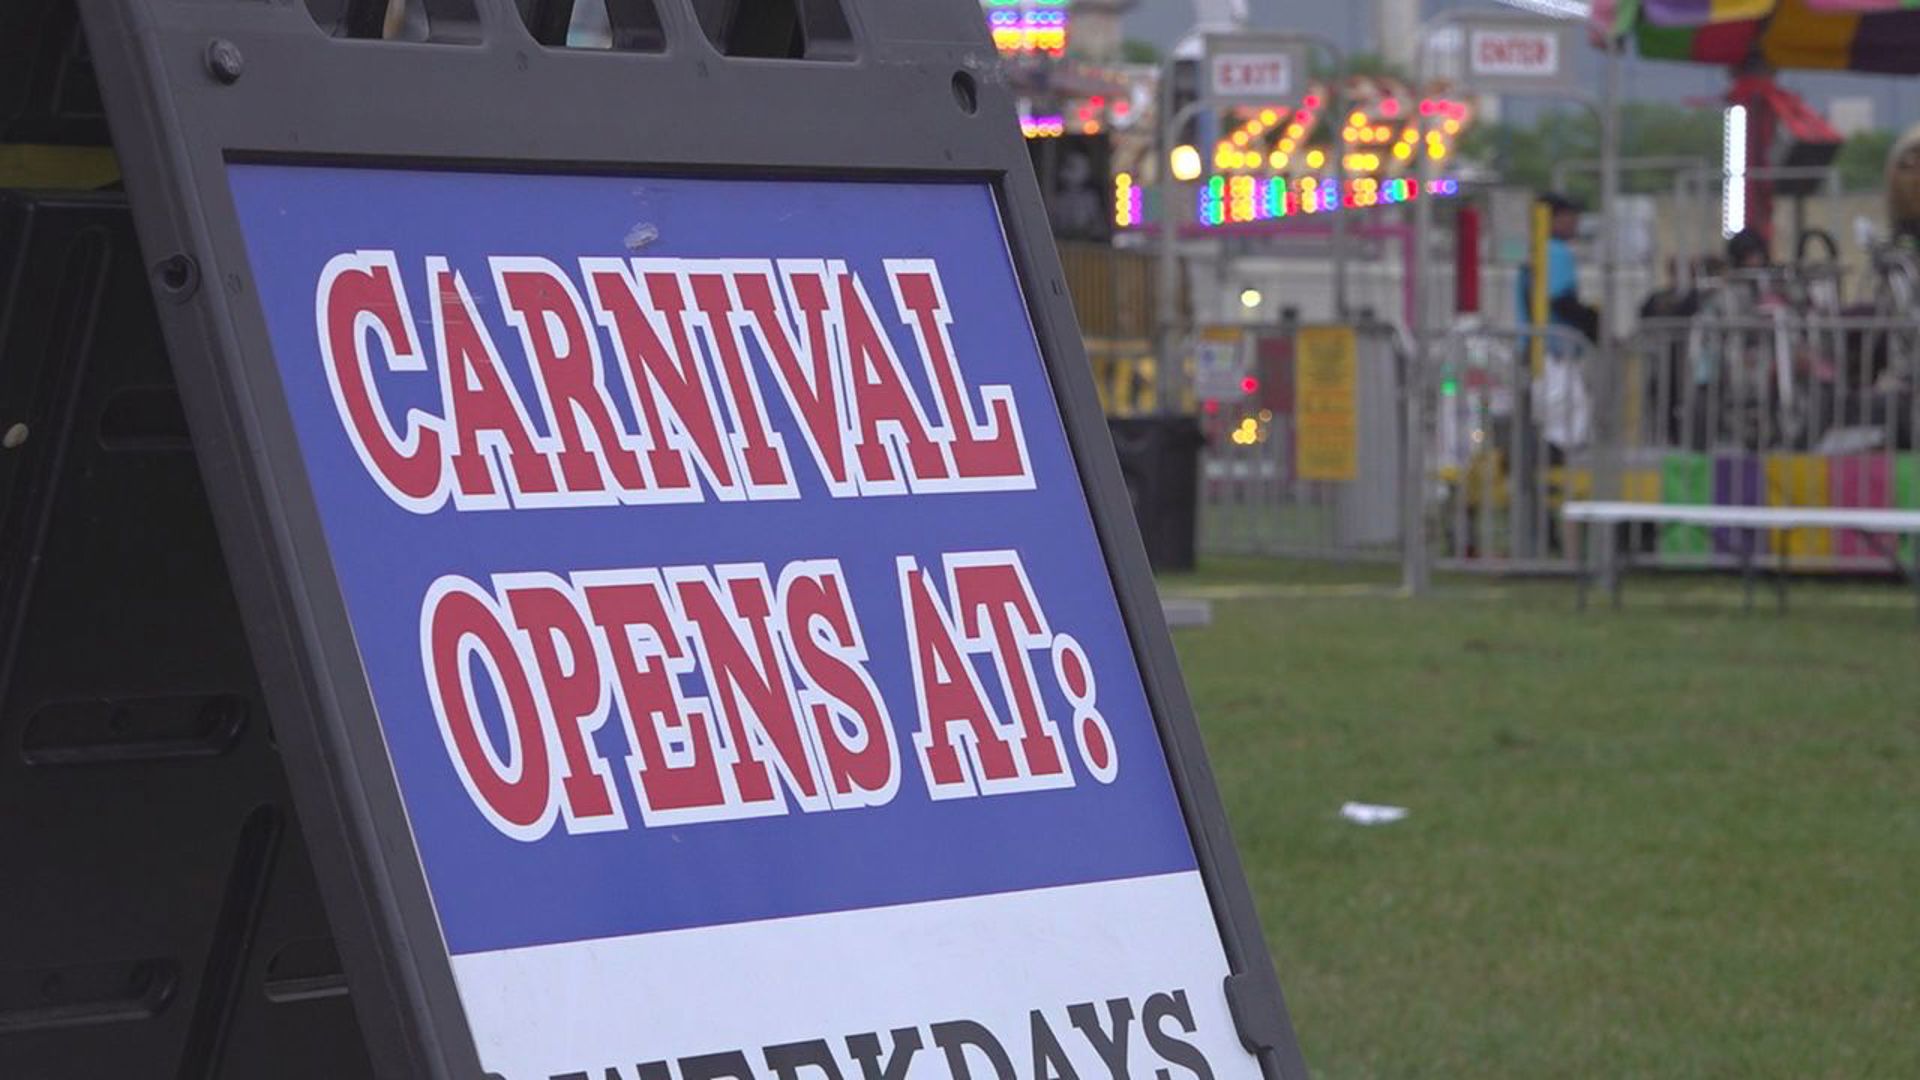 The carnival will run from Wednesday, May 15 through Sunday, May 19 from 6 to 10 p.m.